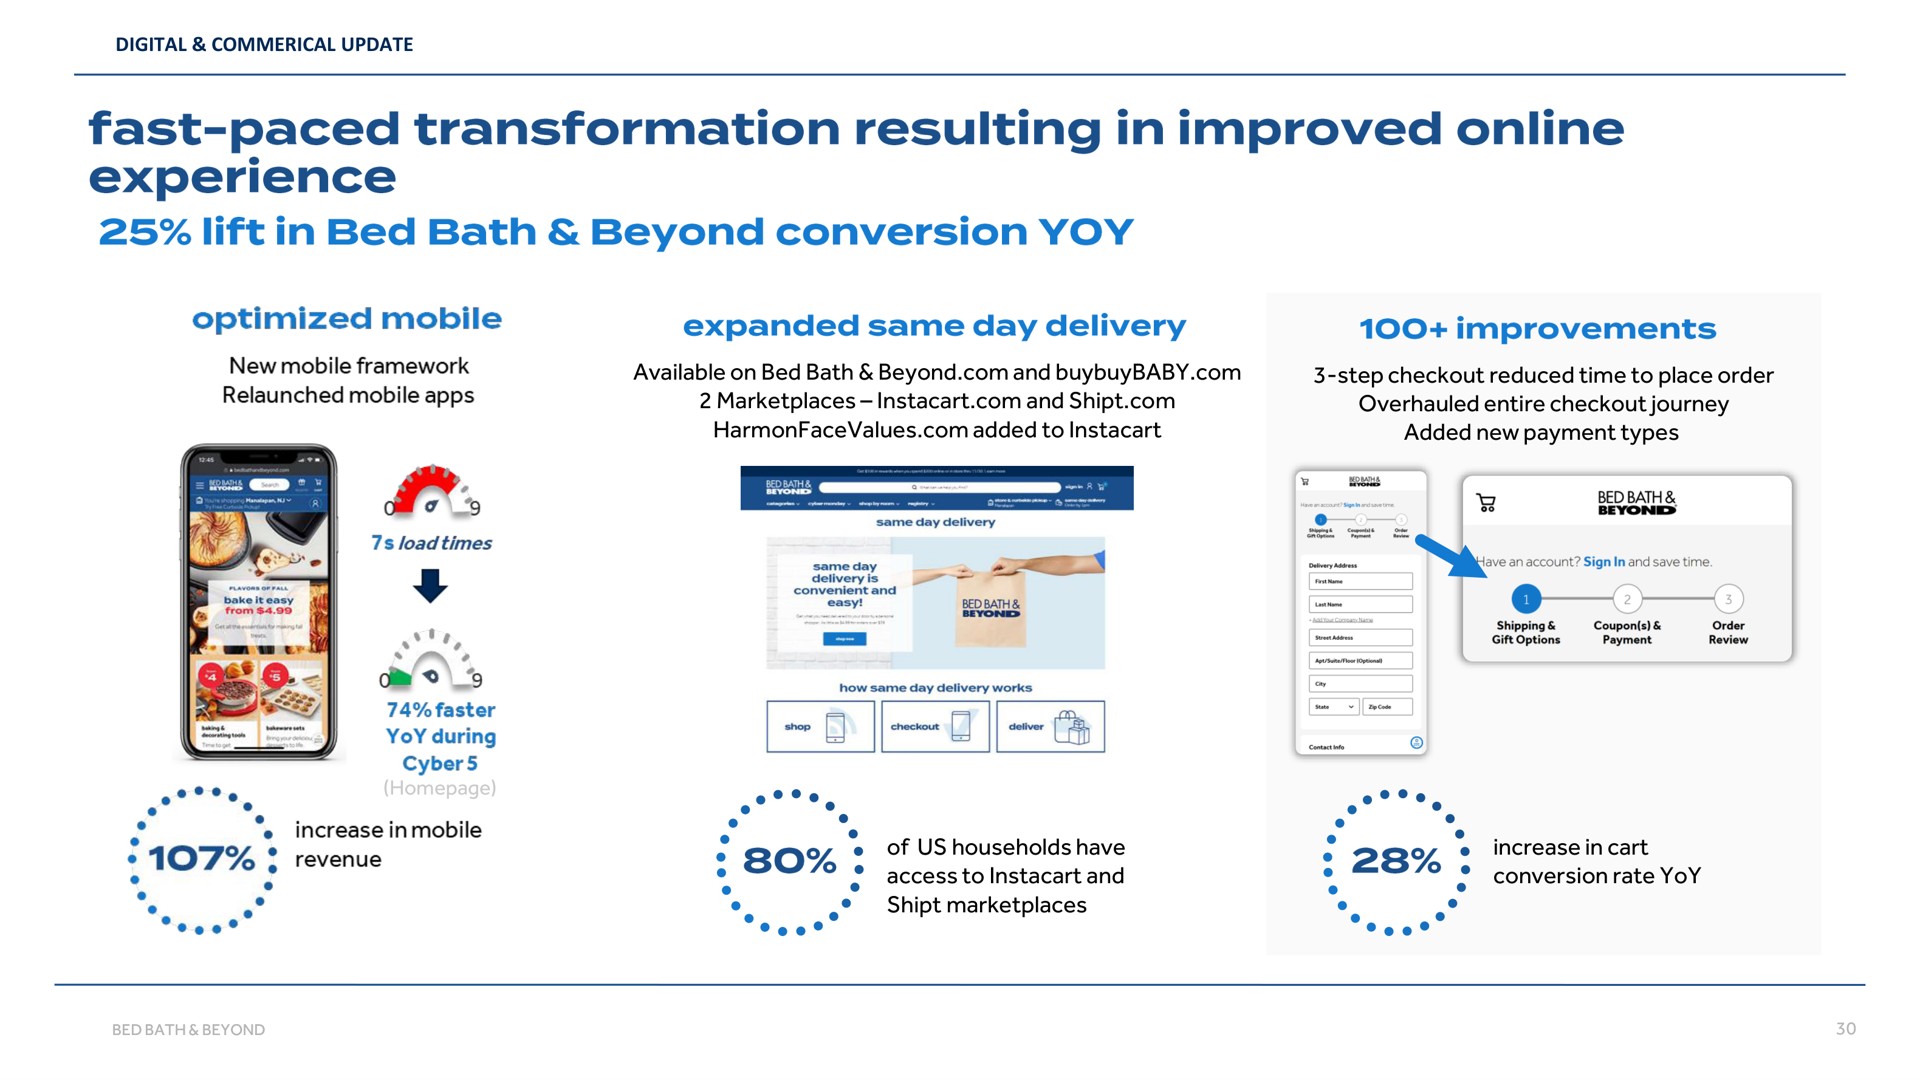 available on bed bath beyond and and added to step reduced time to place order overhauled entire journey added new payment types of us households have access to and increase in cart conversion rate yoy fast paced transformation resulting improved experience lift | Bed Bath & Beyond